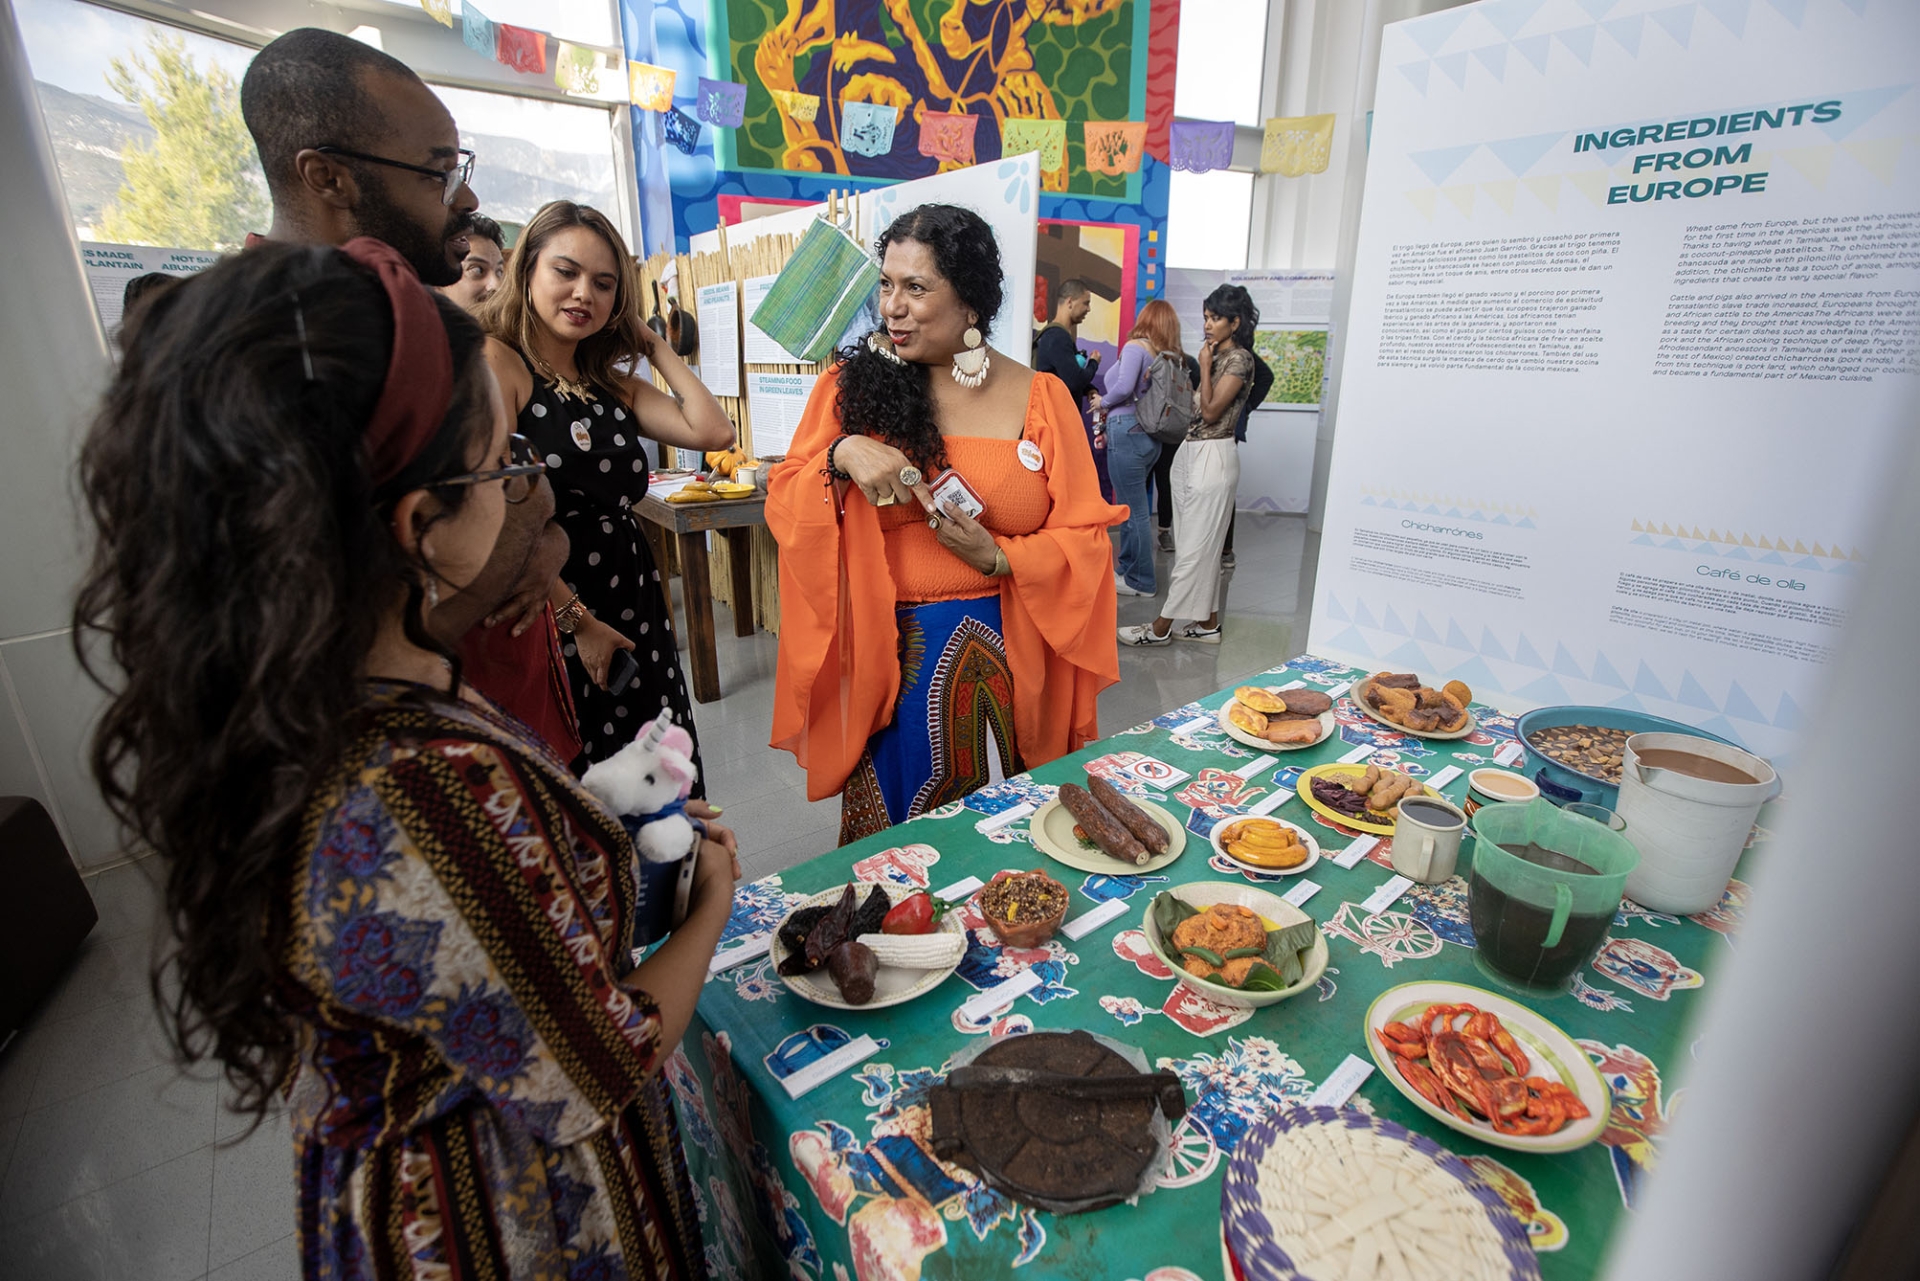 Doris Careaga-Coleman (right), lead curator for the Tamiahua section of Afróntalo, explains the merging of the African and Latino culinary heritage of the region’s food.